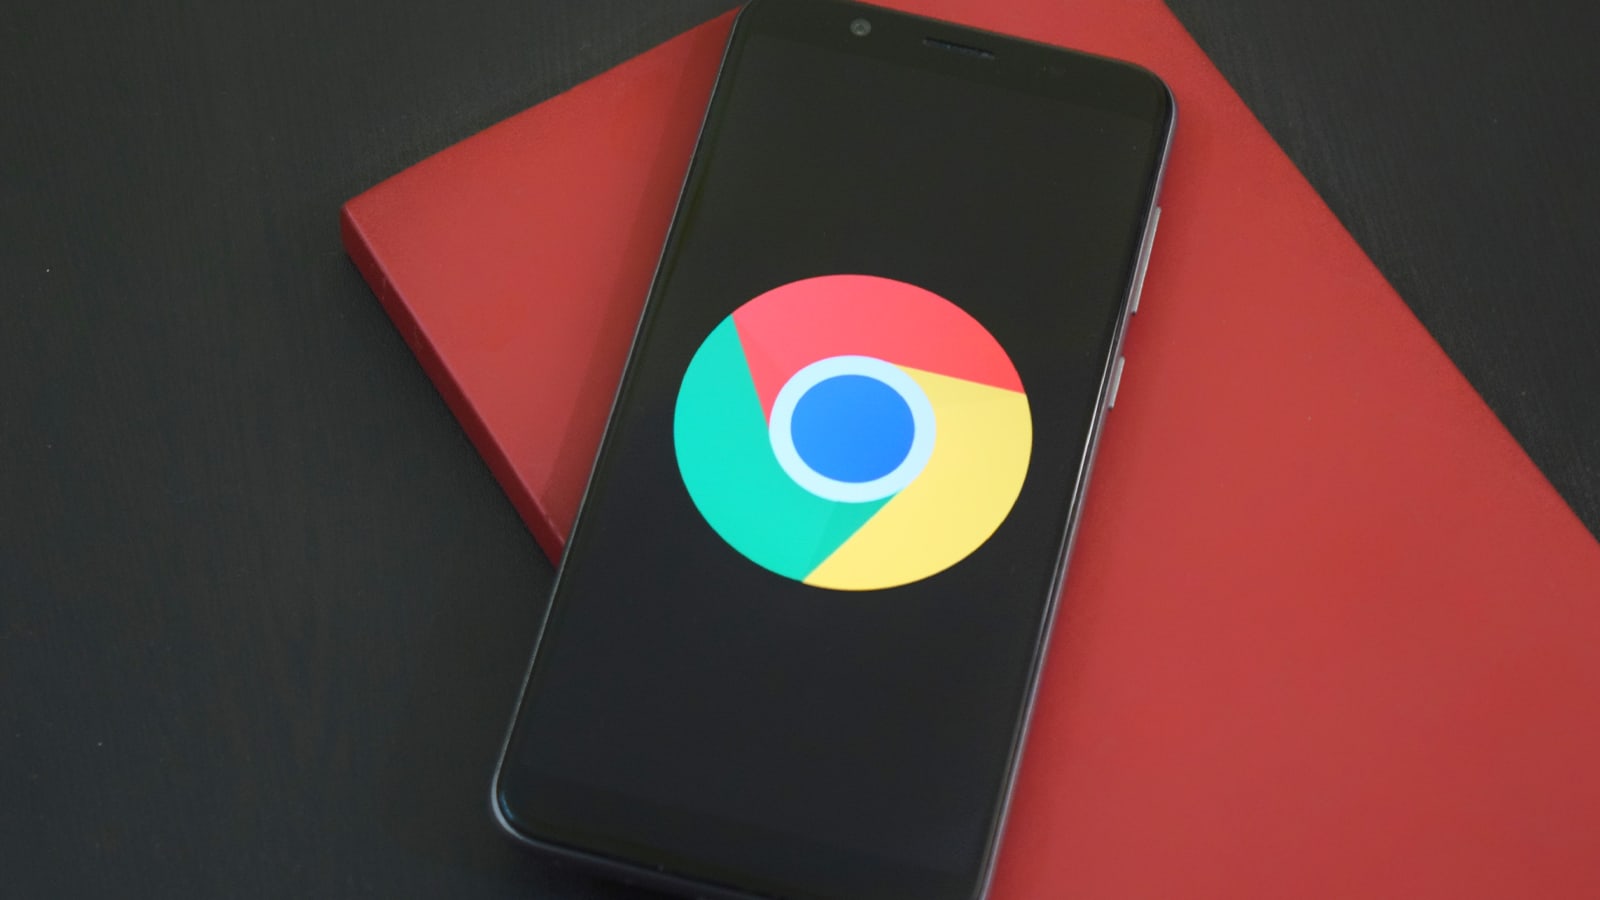 How To Uninstall Chrome on Android